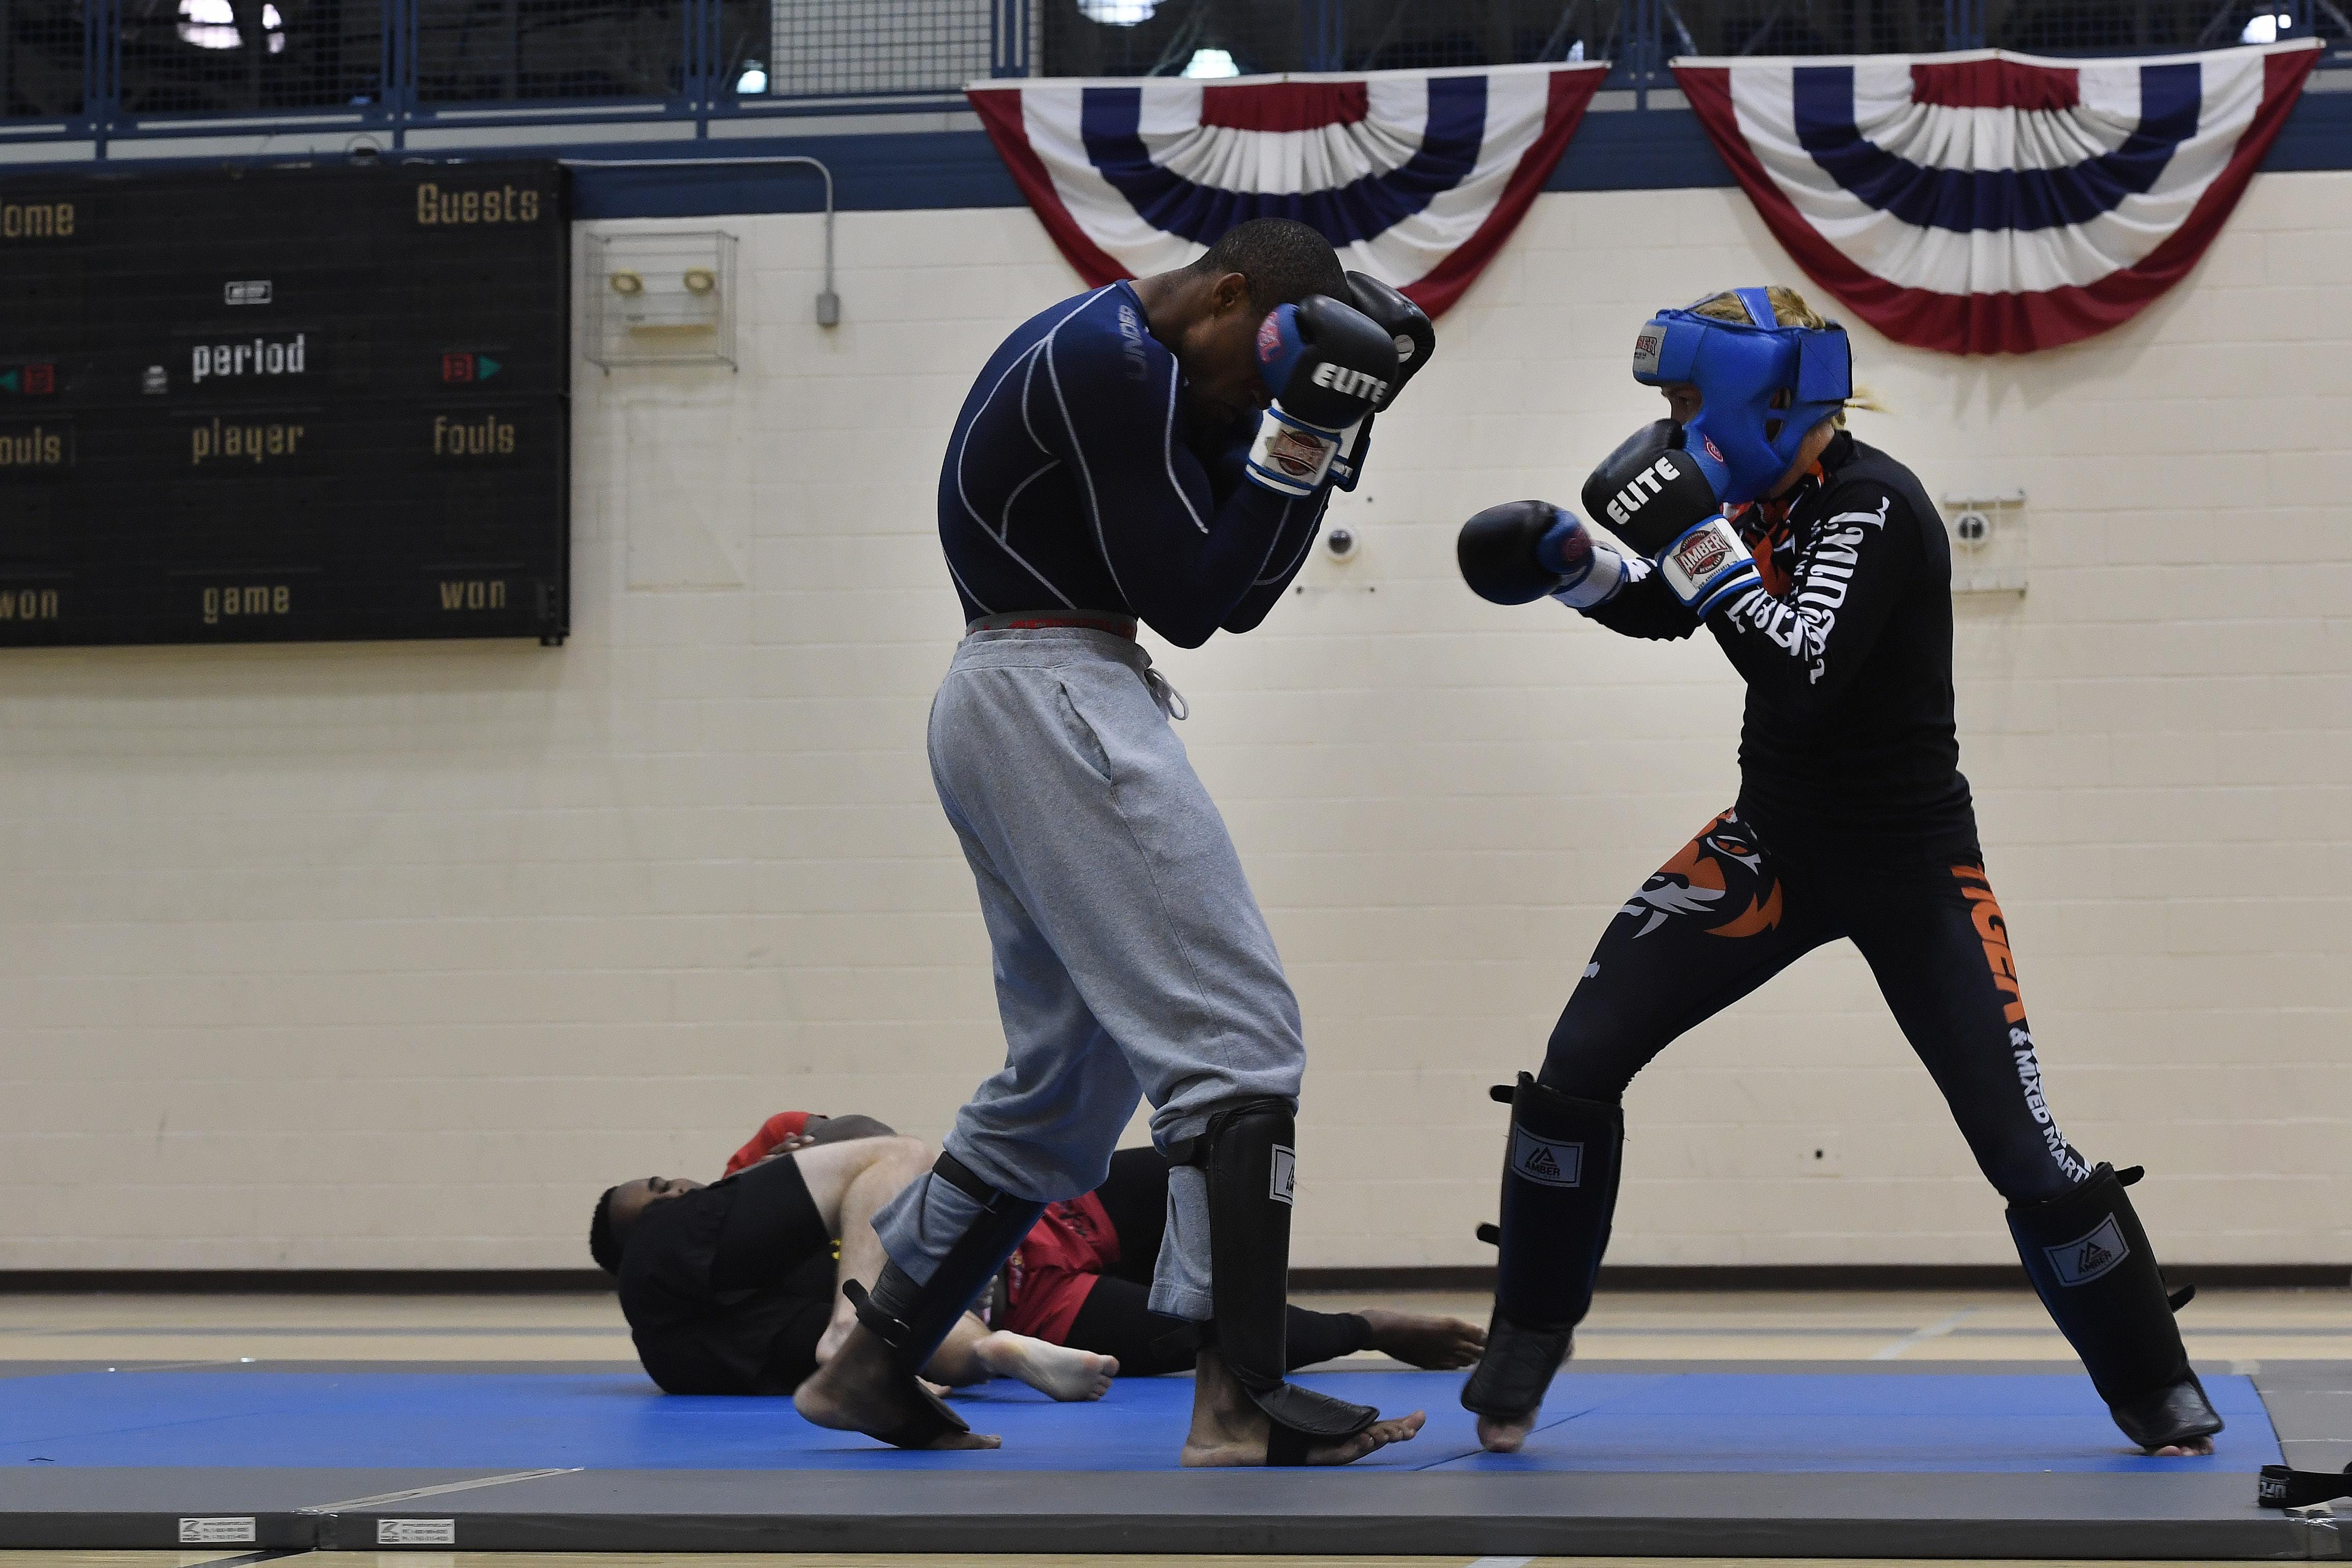 A man and woman sparring in Muay Thai